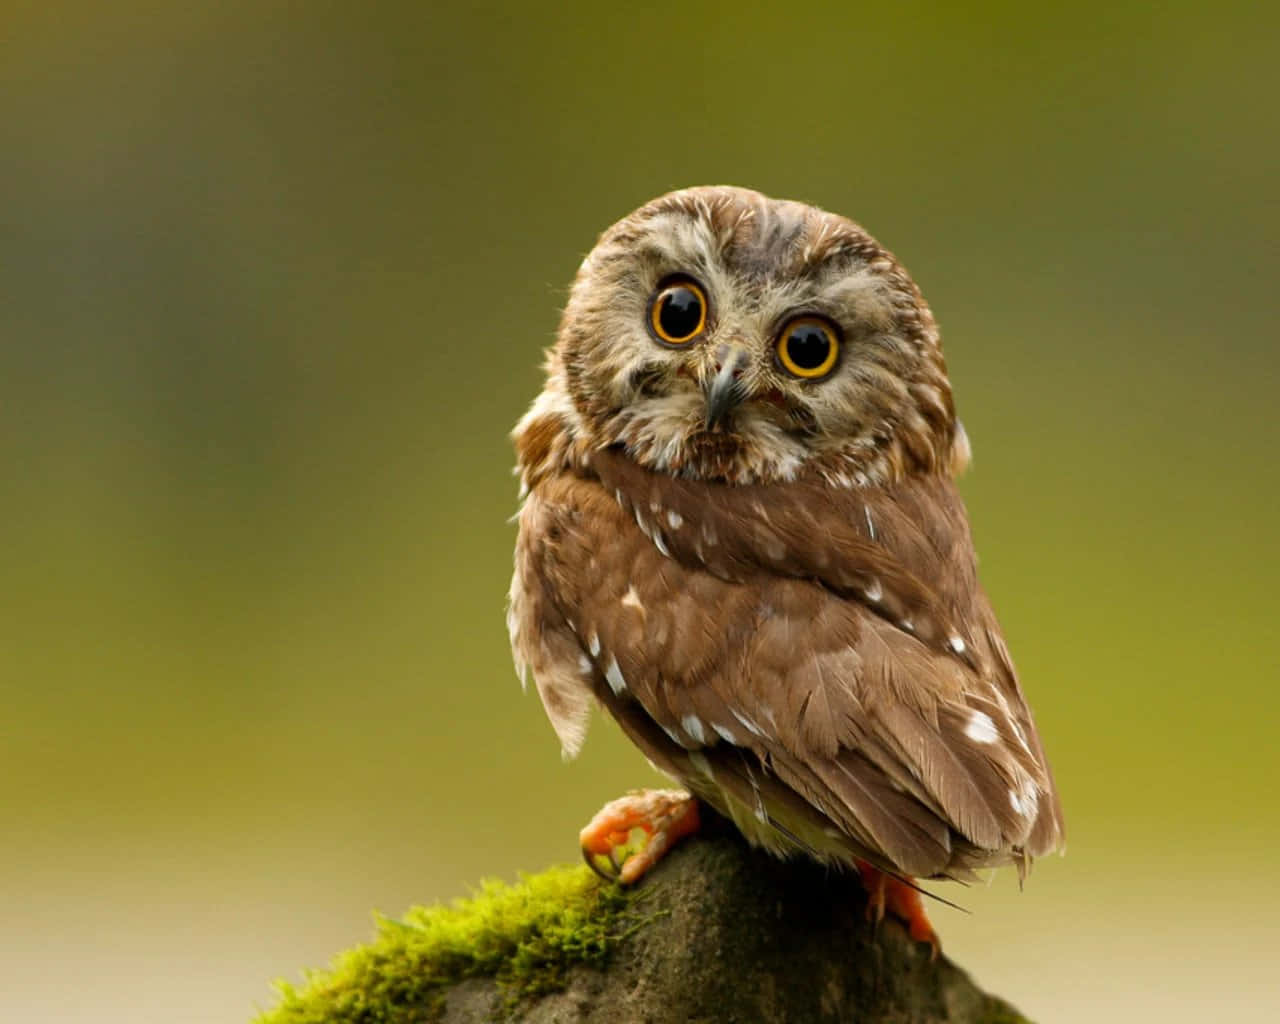 A Small Owl Sitting On Top Of A Mossy Stump